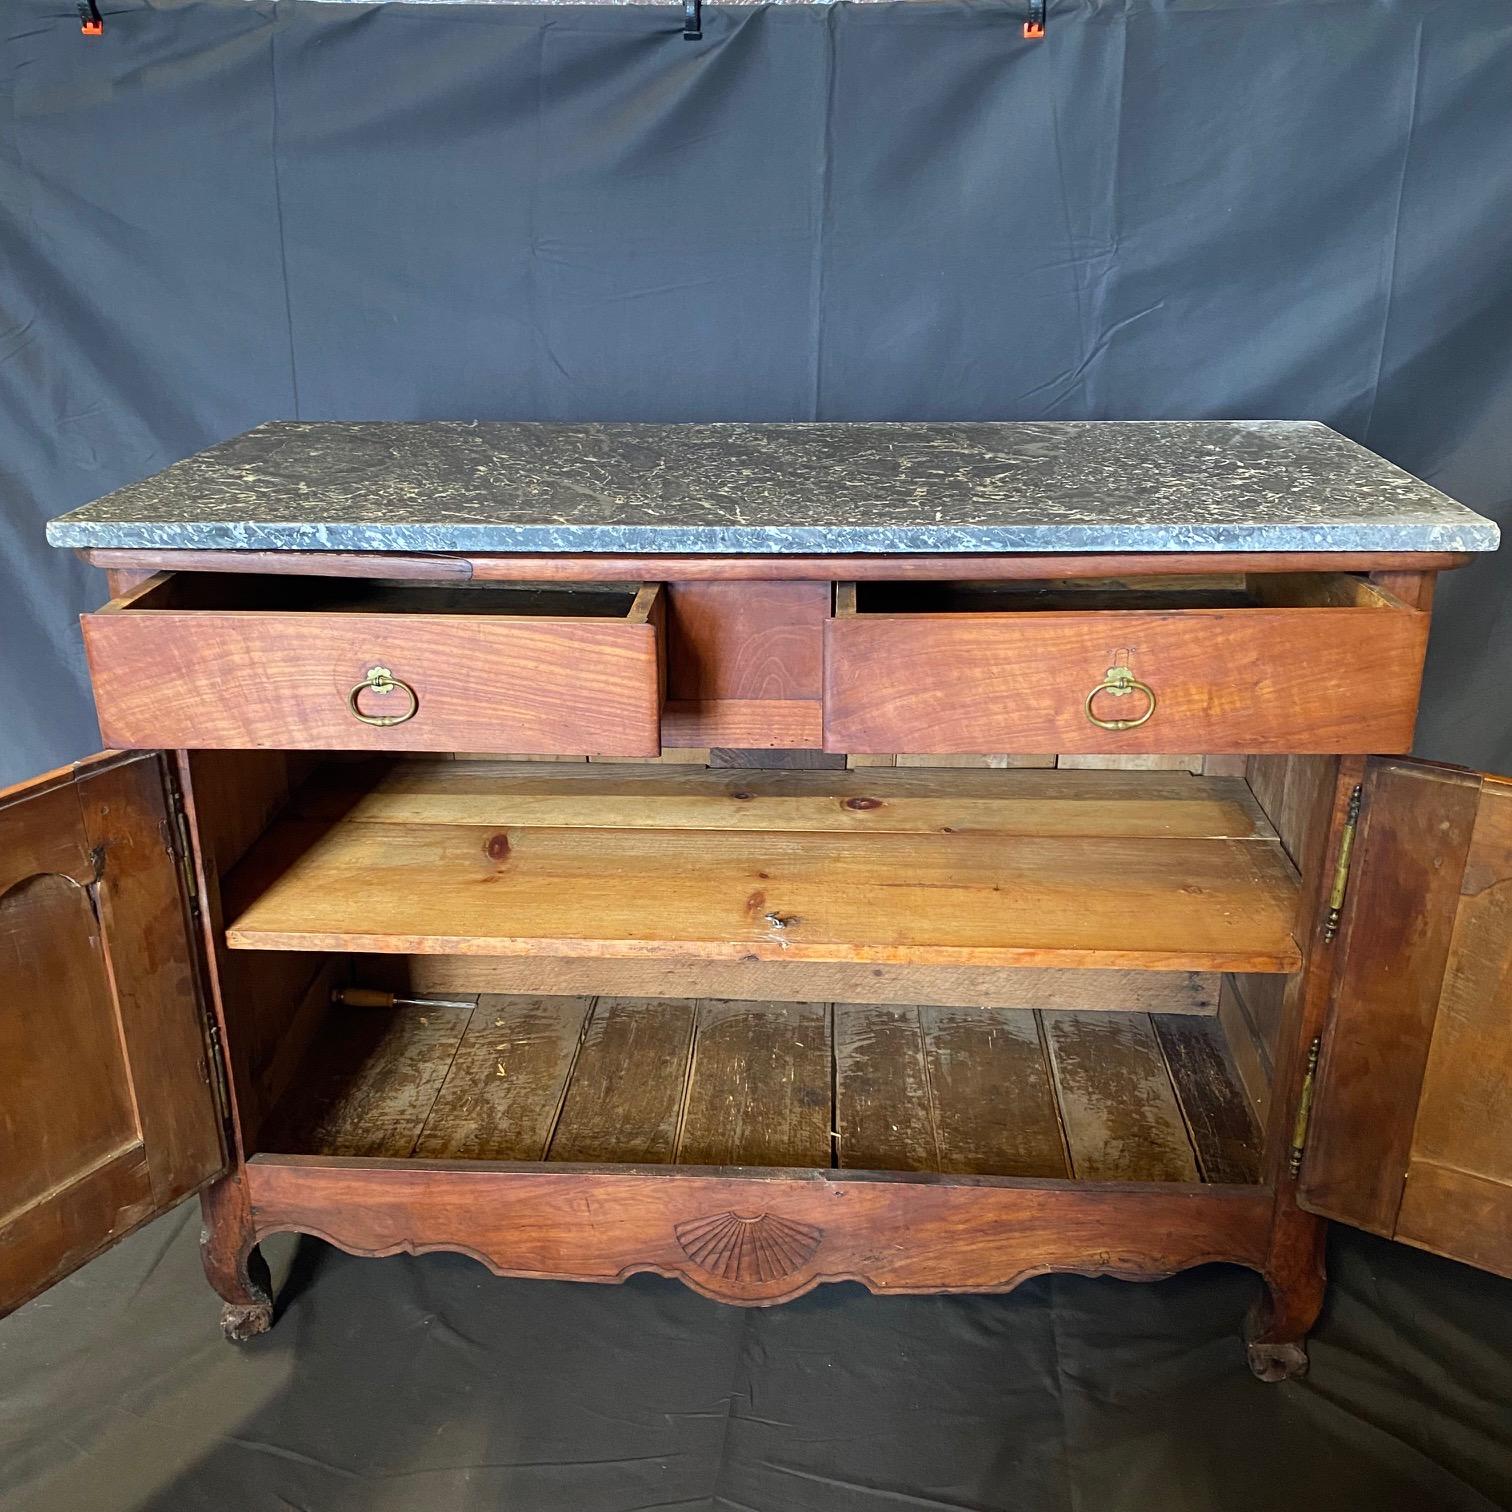 Early 19th century Country French Buffet, entirely hand-crafted from old-growth cherry, and accented with brass hinges, hand etched escutcheons with original key and lovely pulls with rosettes. Look closely to see the pegged mortise & tenon joinery,